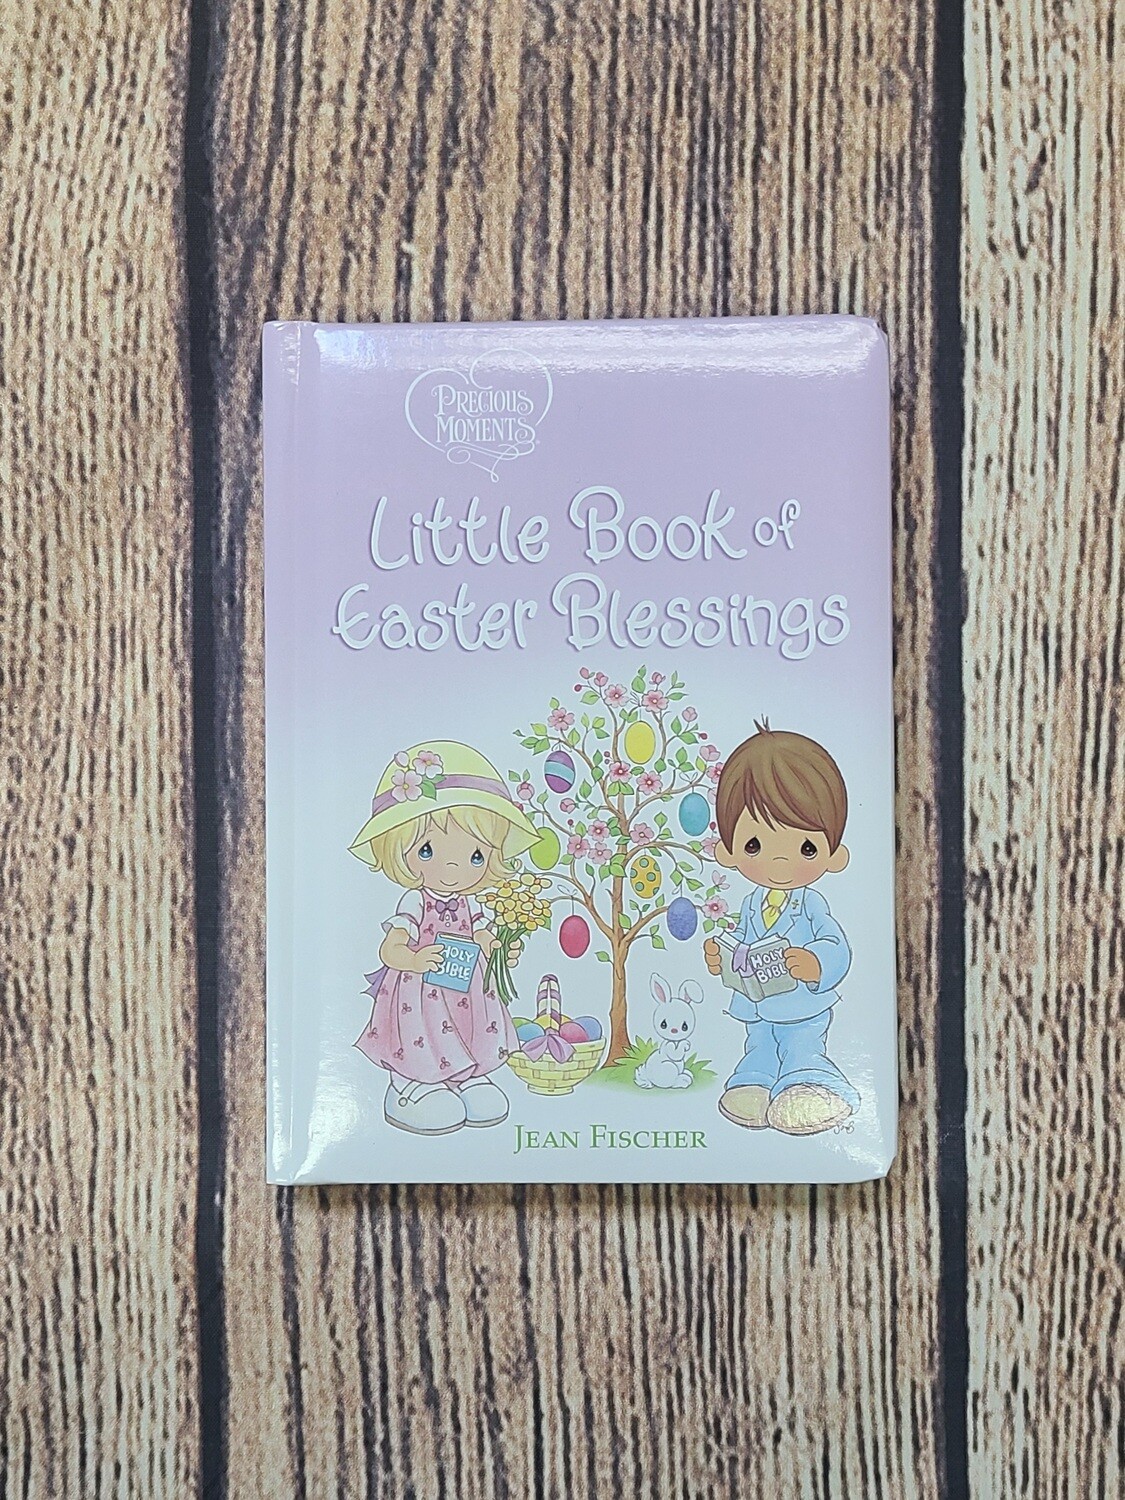 Precious Moments Little Book of Easter Blessings by Jean Fischer